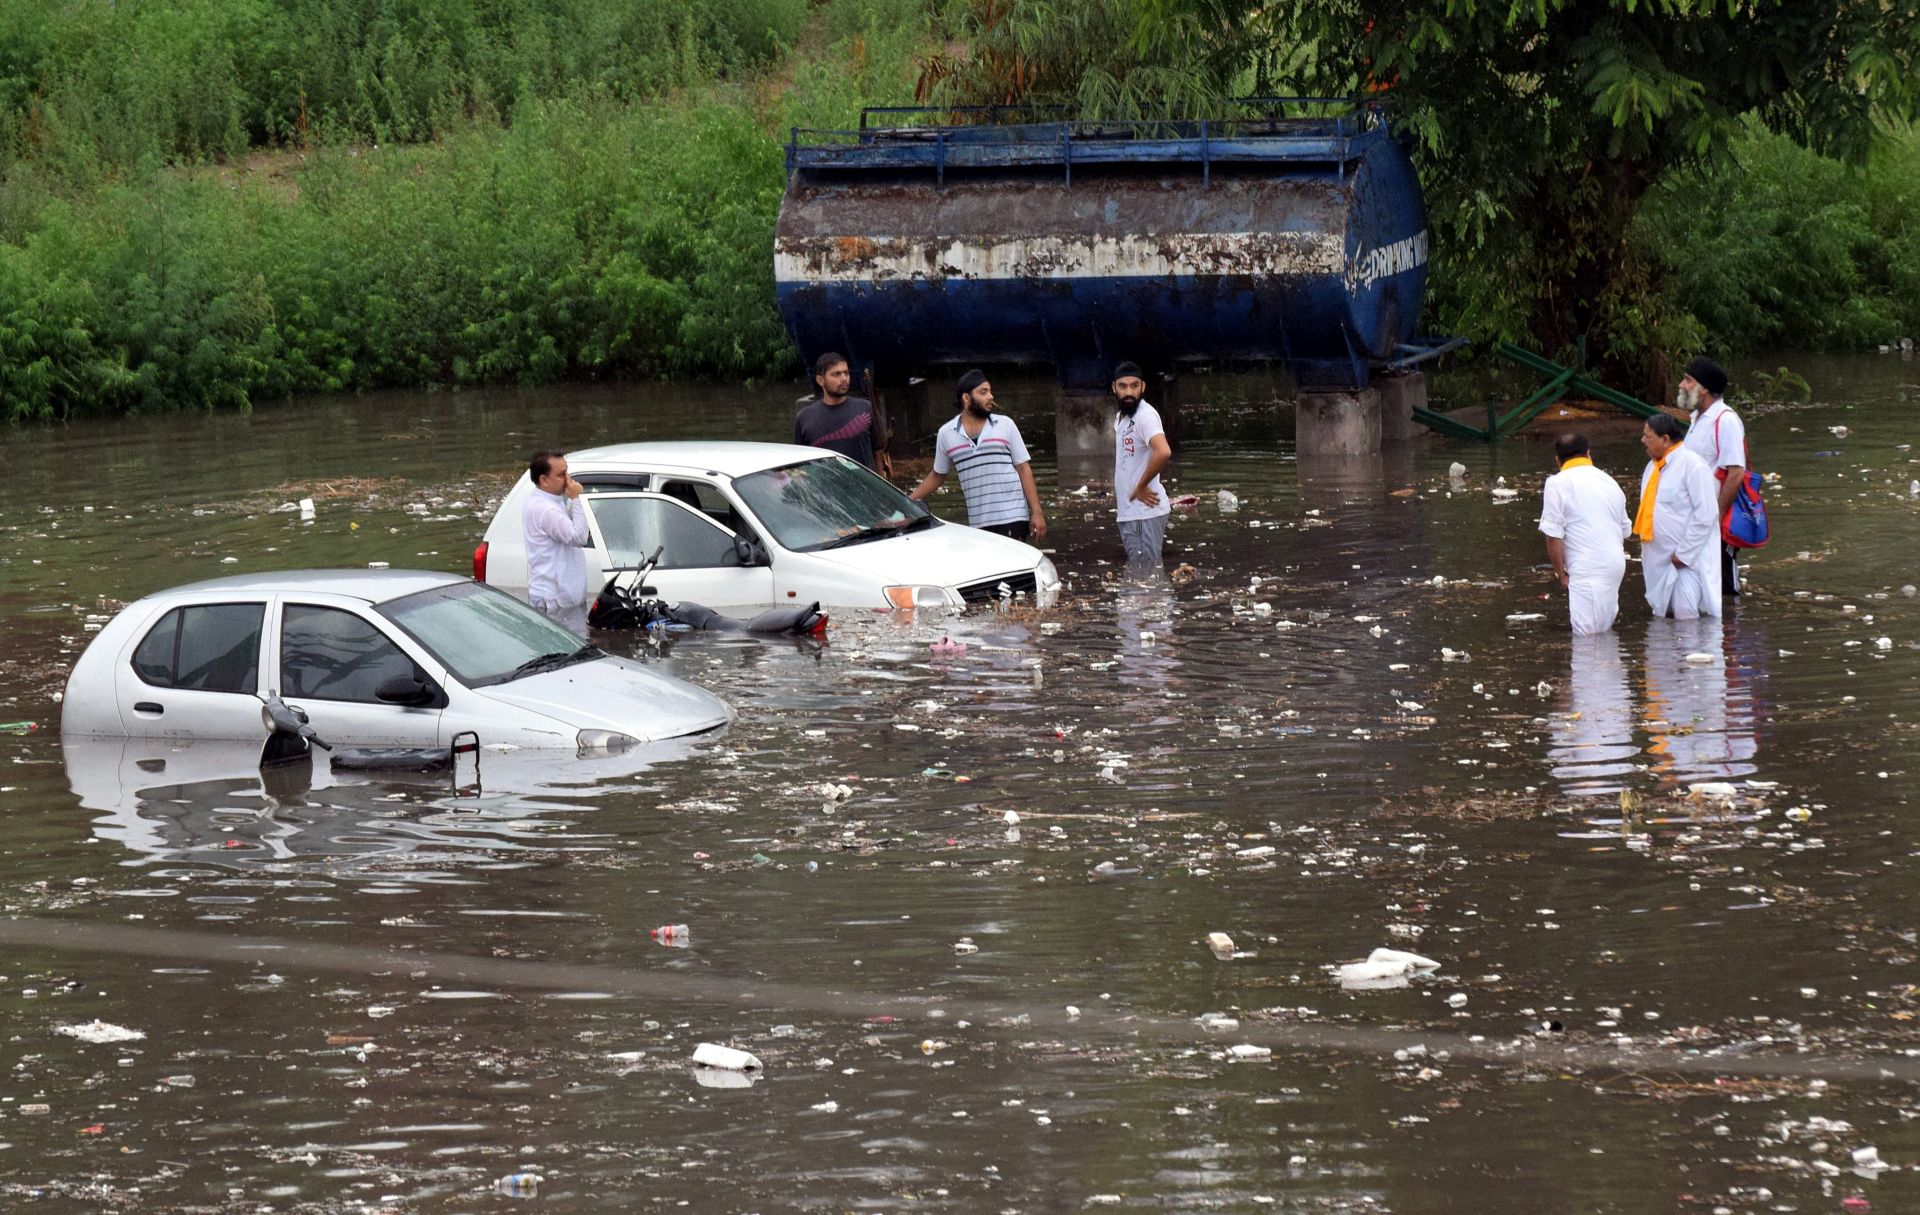 epa05380815 Indian people stands with their drowned vehicles at parking of Maulana Azad Stadium after a heavy monsoon shower in Jammu, the winter capital of Kashmir, India, 21 June 2016. Rain water flooded the entire Jammu city, paralyzing the traffic.  EPA/JAIPAL SINGH